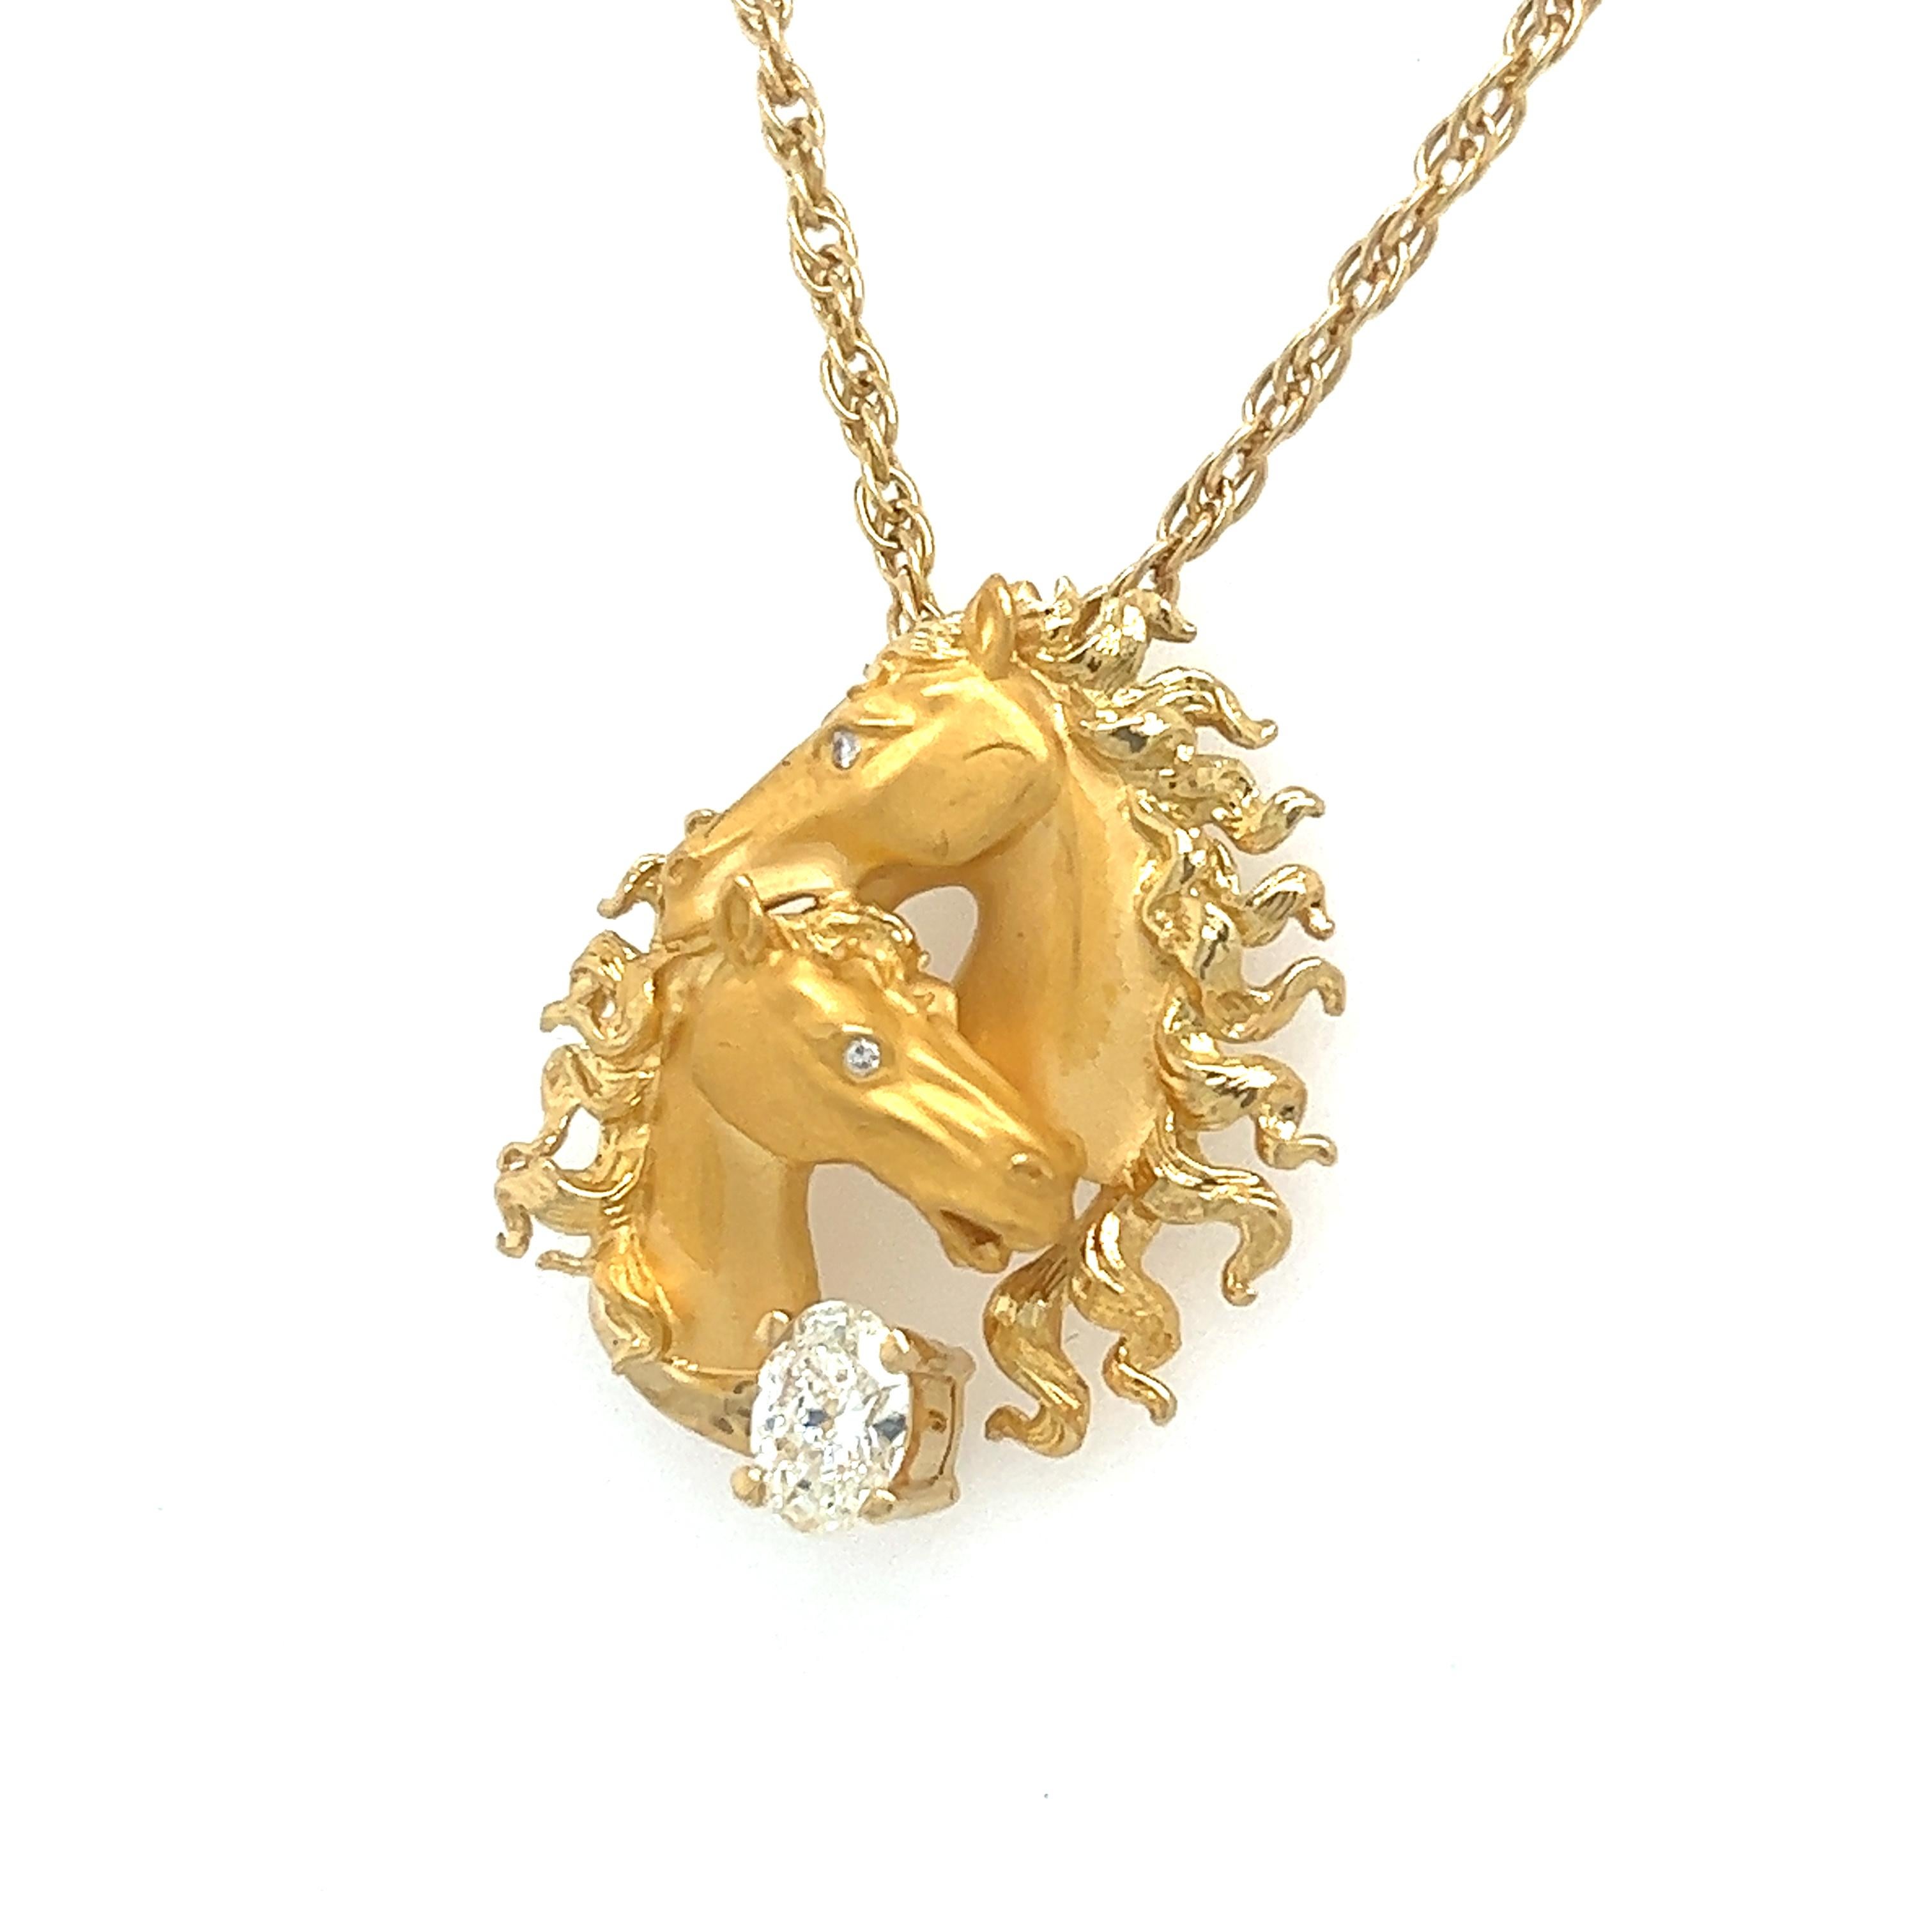 Beautiful creation from famed designer Carrera Y Carrera. Crafted in 18k yellow gold this horse themed diamond pendant is more than a necklace it is a piece of art!
Details are endless as both satin and high polish techniques are seen to highlight